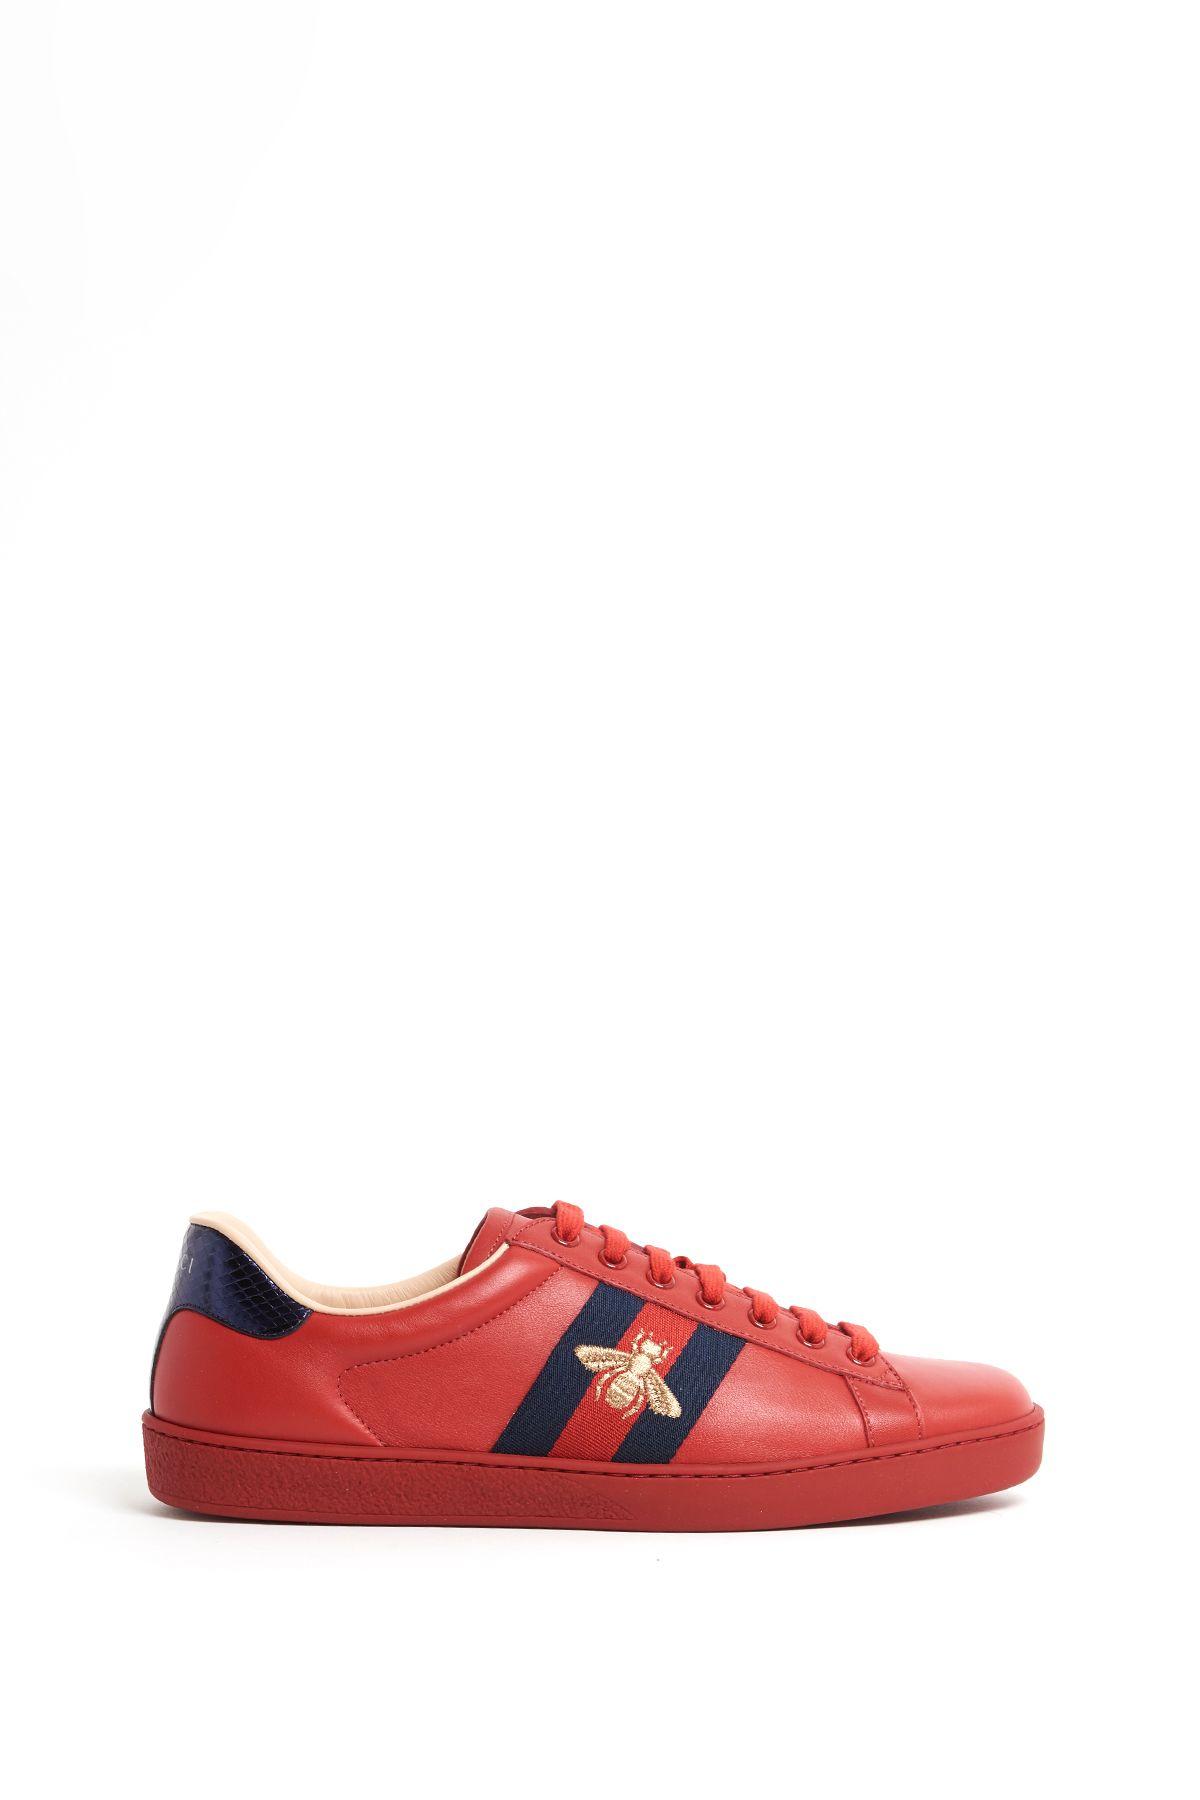 Gucci Sneakers In Red | ModeSens